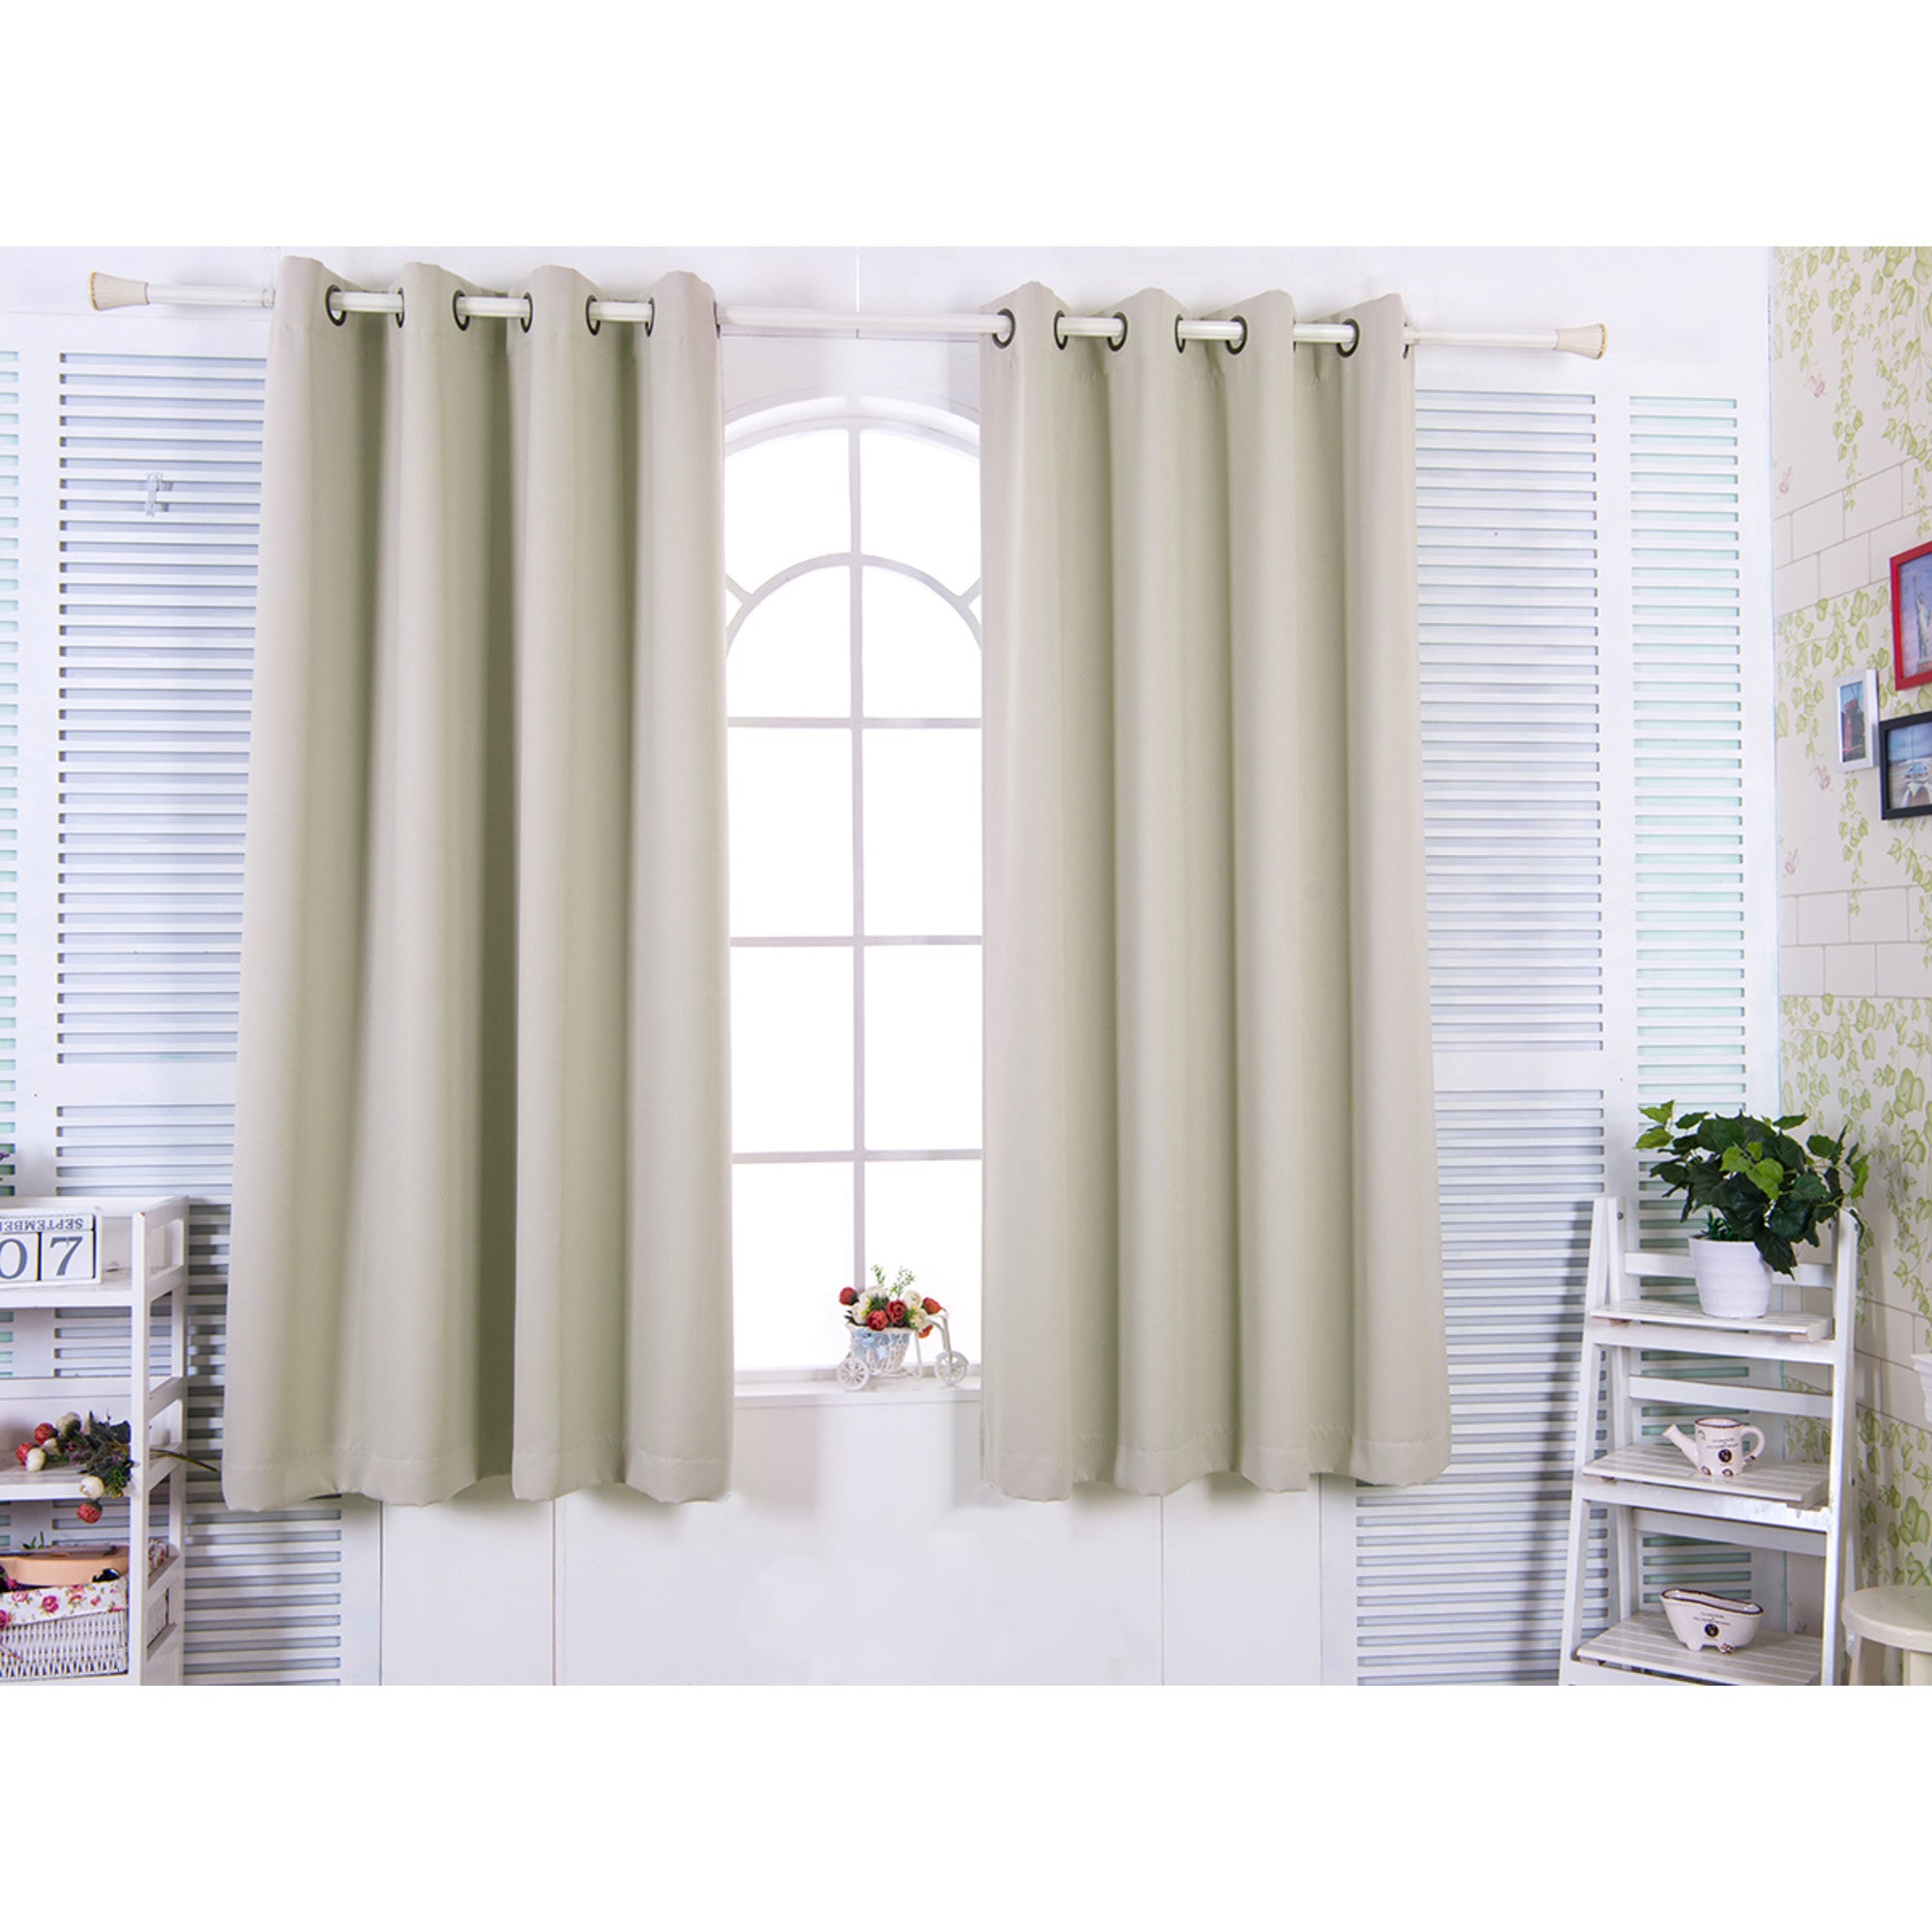 Teamson Home 84" Tripoli Premium Solid Insulated Thermal Blackout Window Curtain Panels with Grommets, Oyster